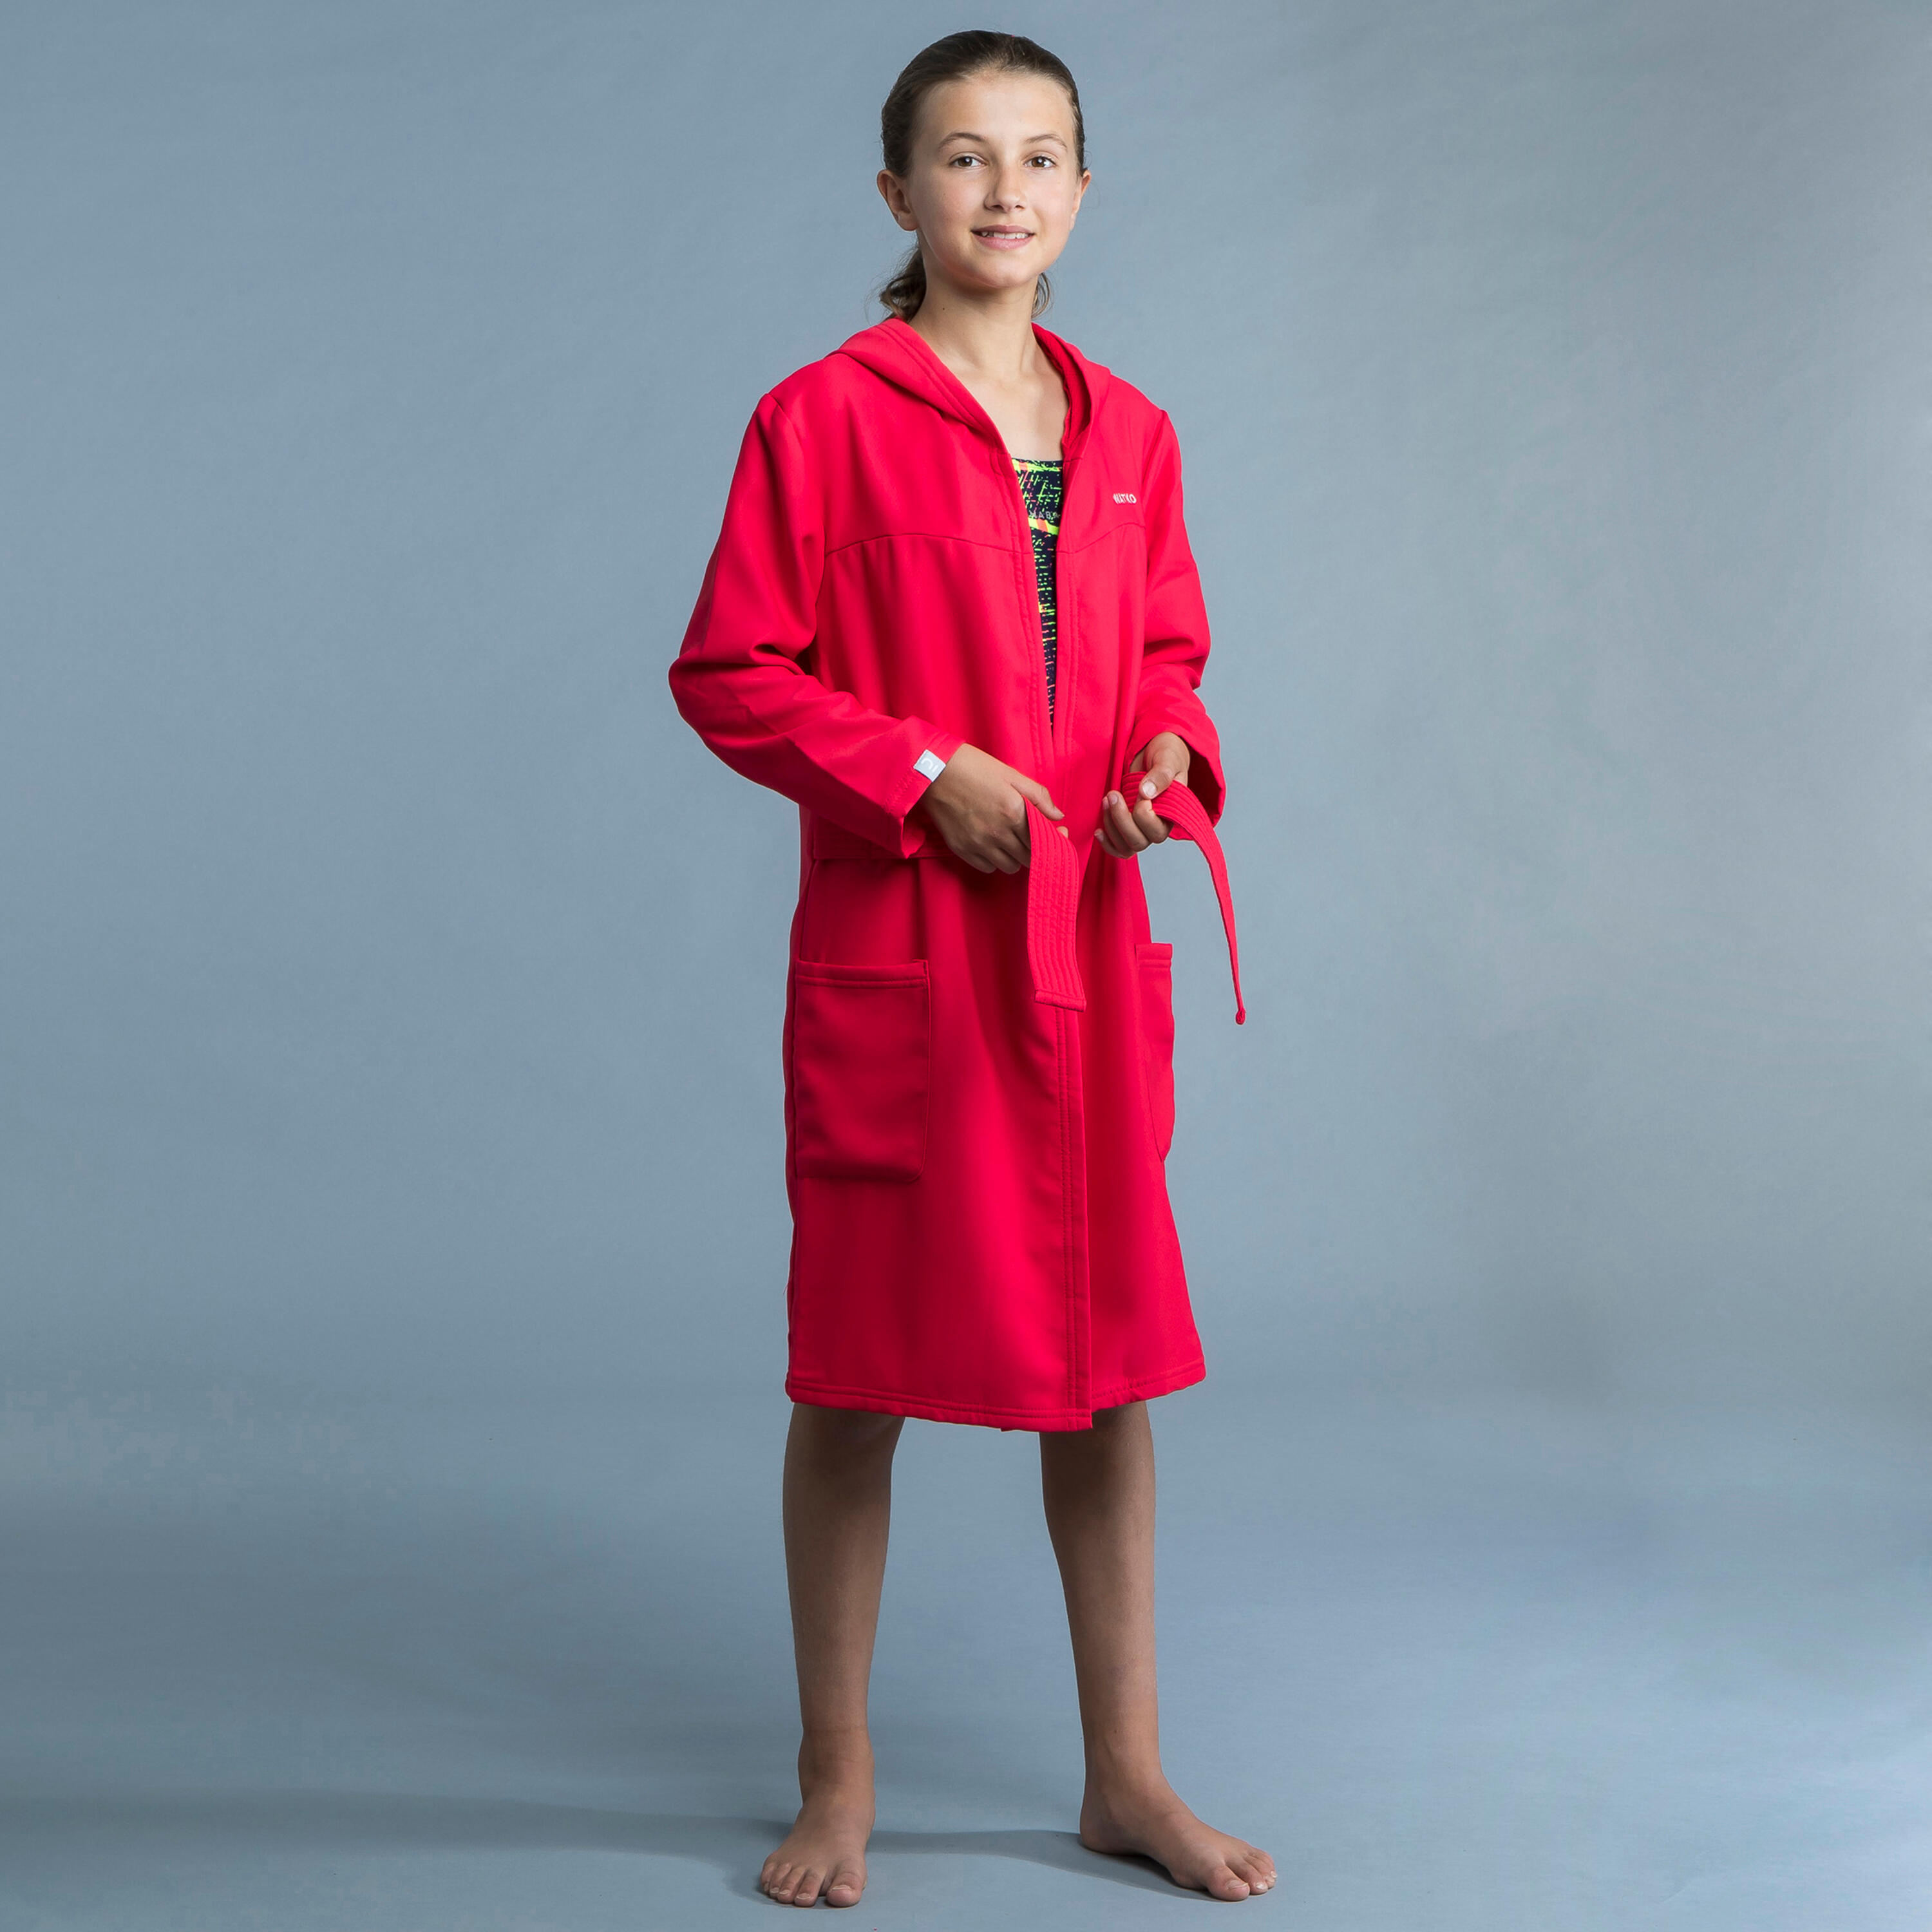 KID'S COMPACT BATHROBE AND TOWEL - RED 2/7